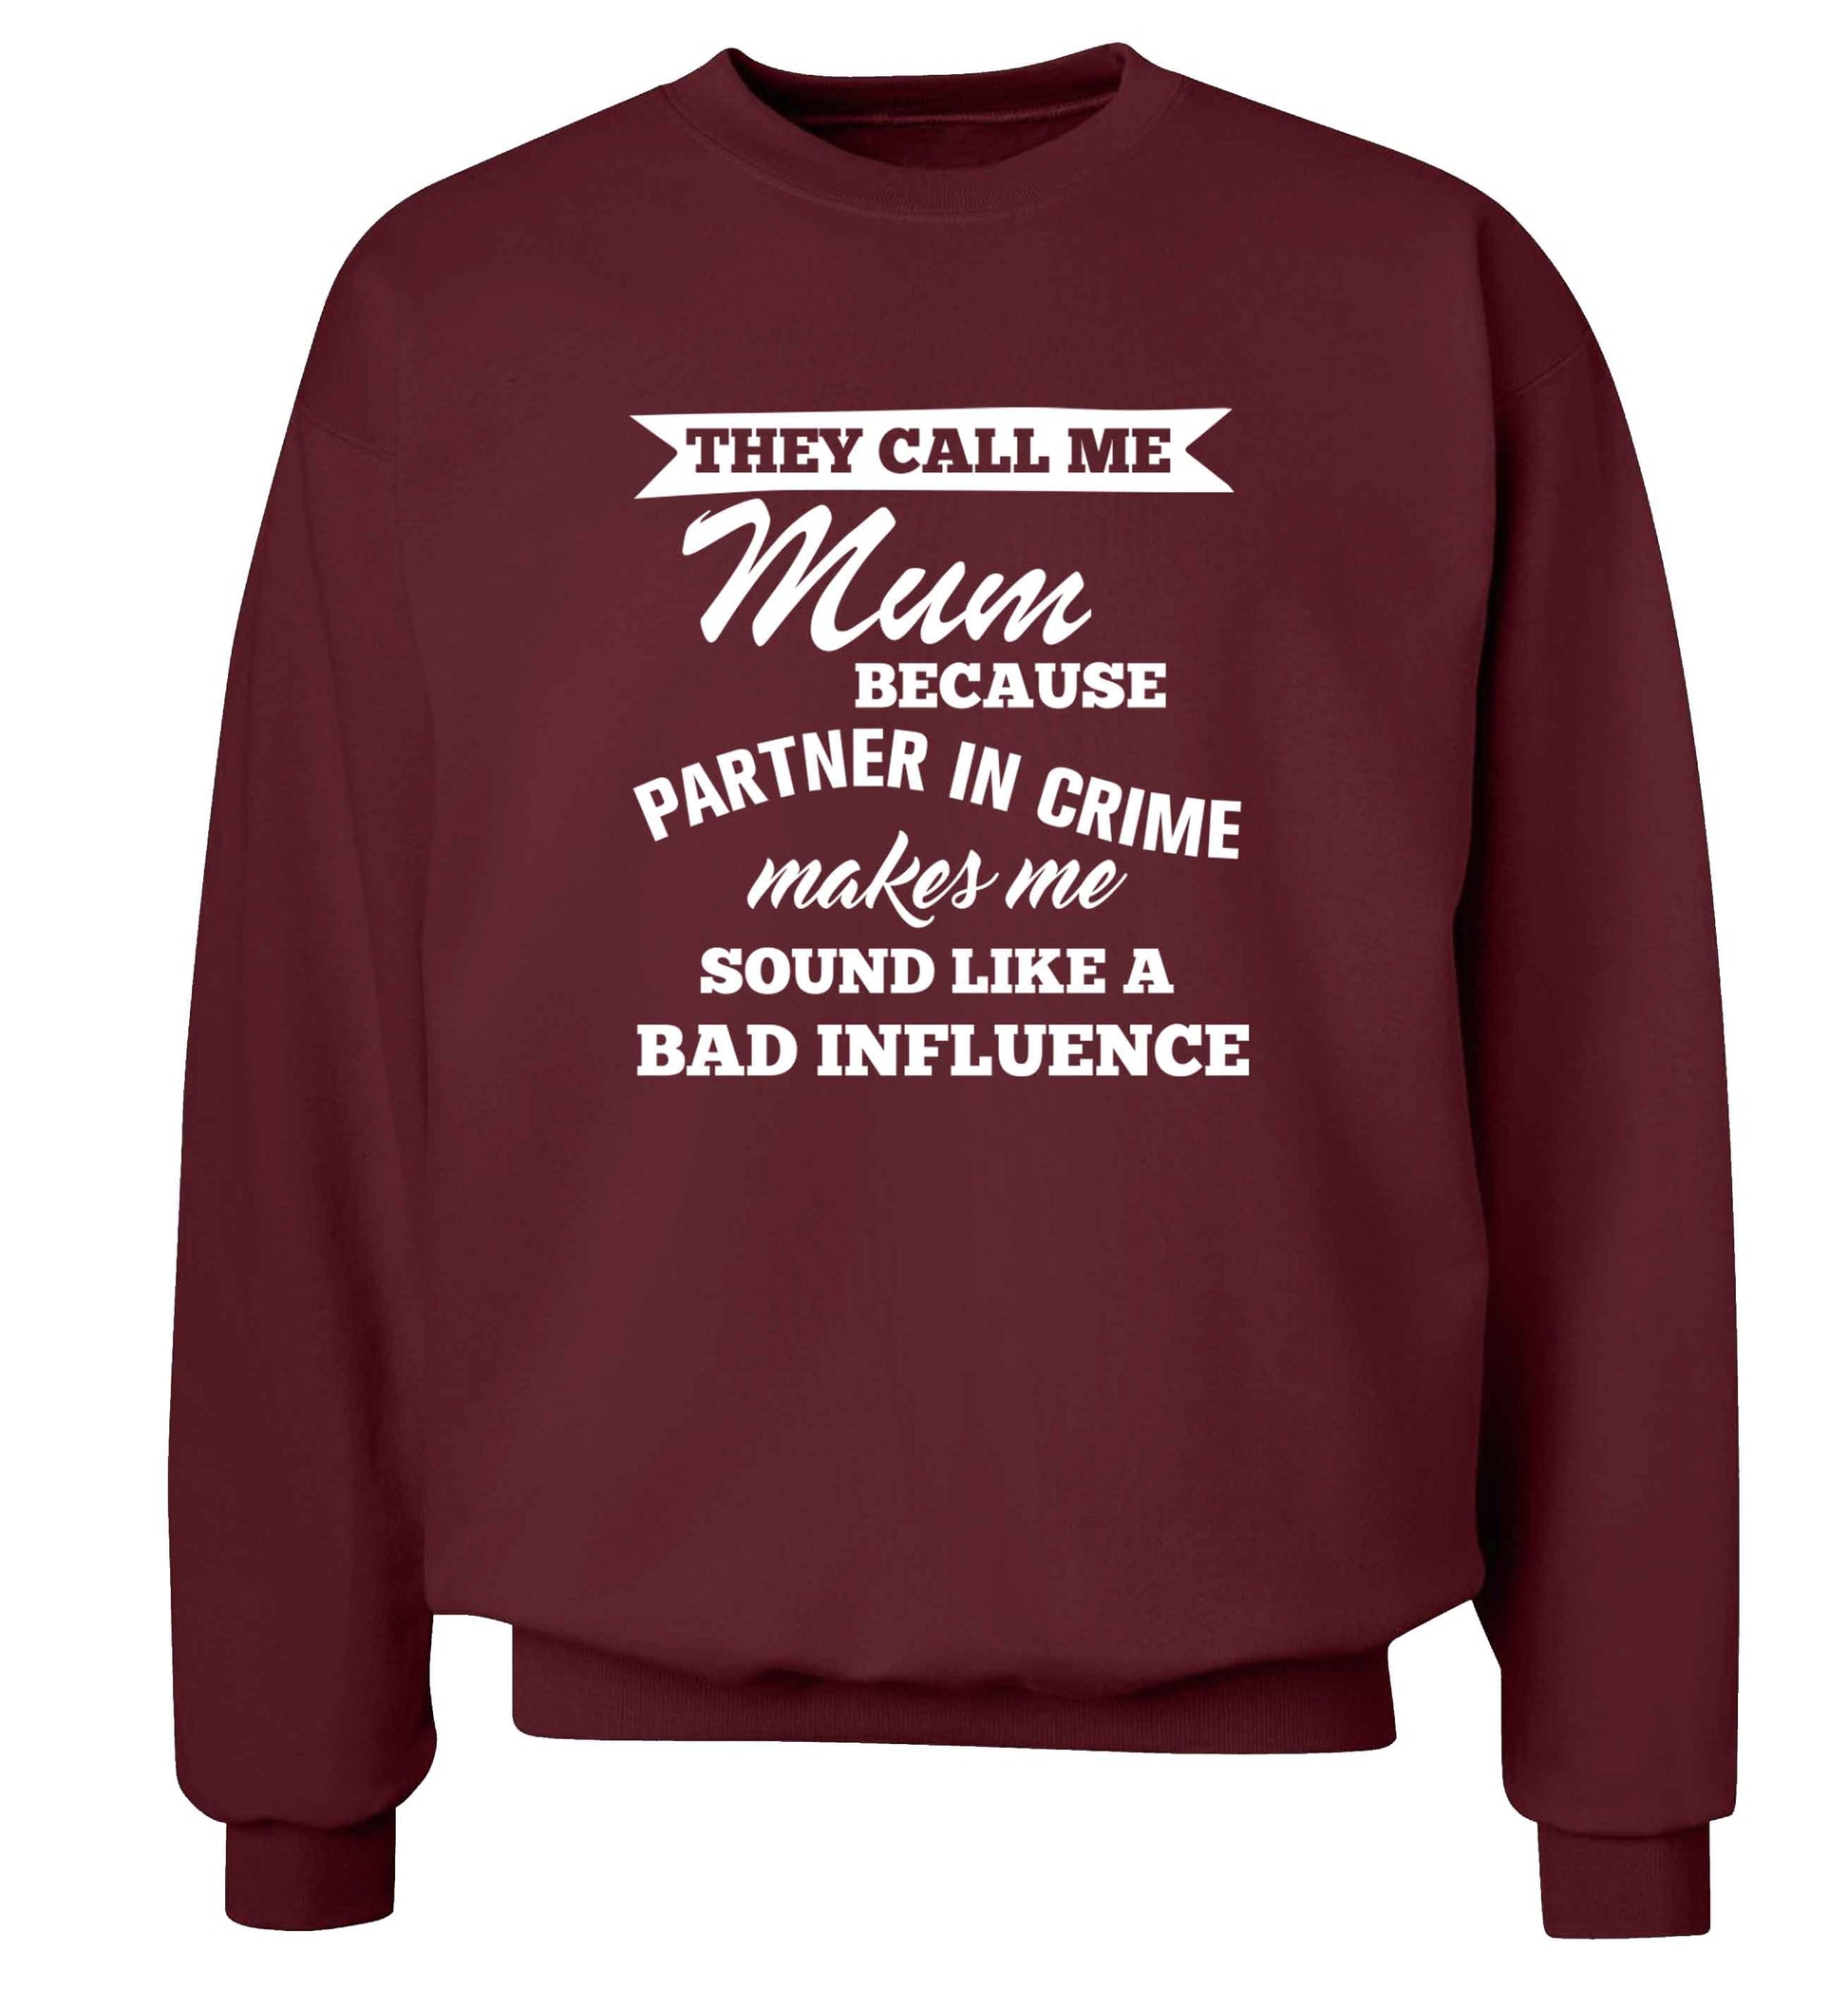 They call me mum because partner in crime makes me sound like a bad influence adult's unisex maroon sweater 2XL